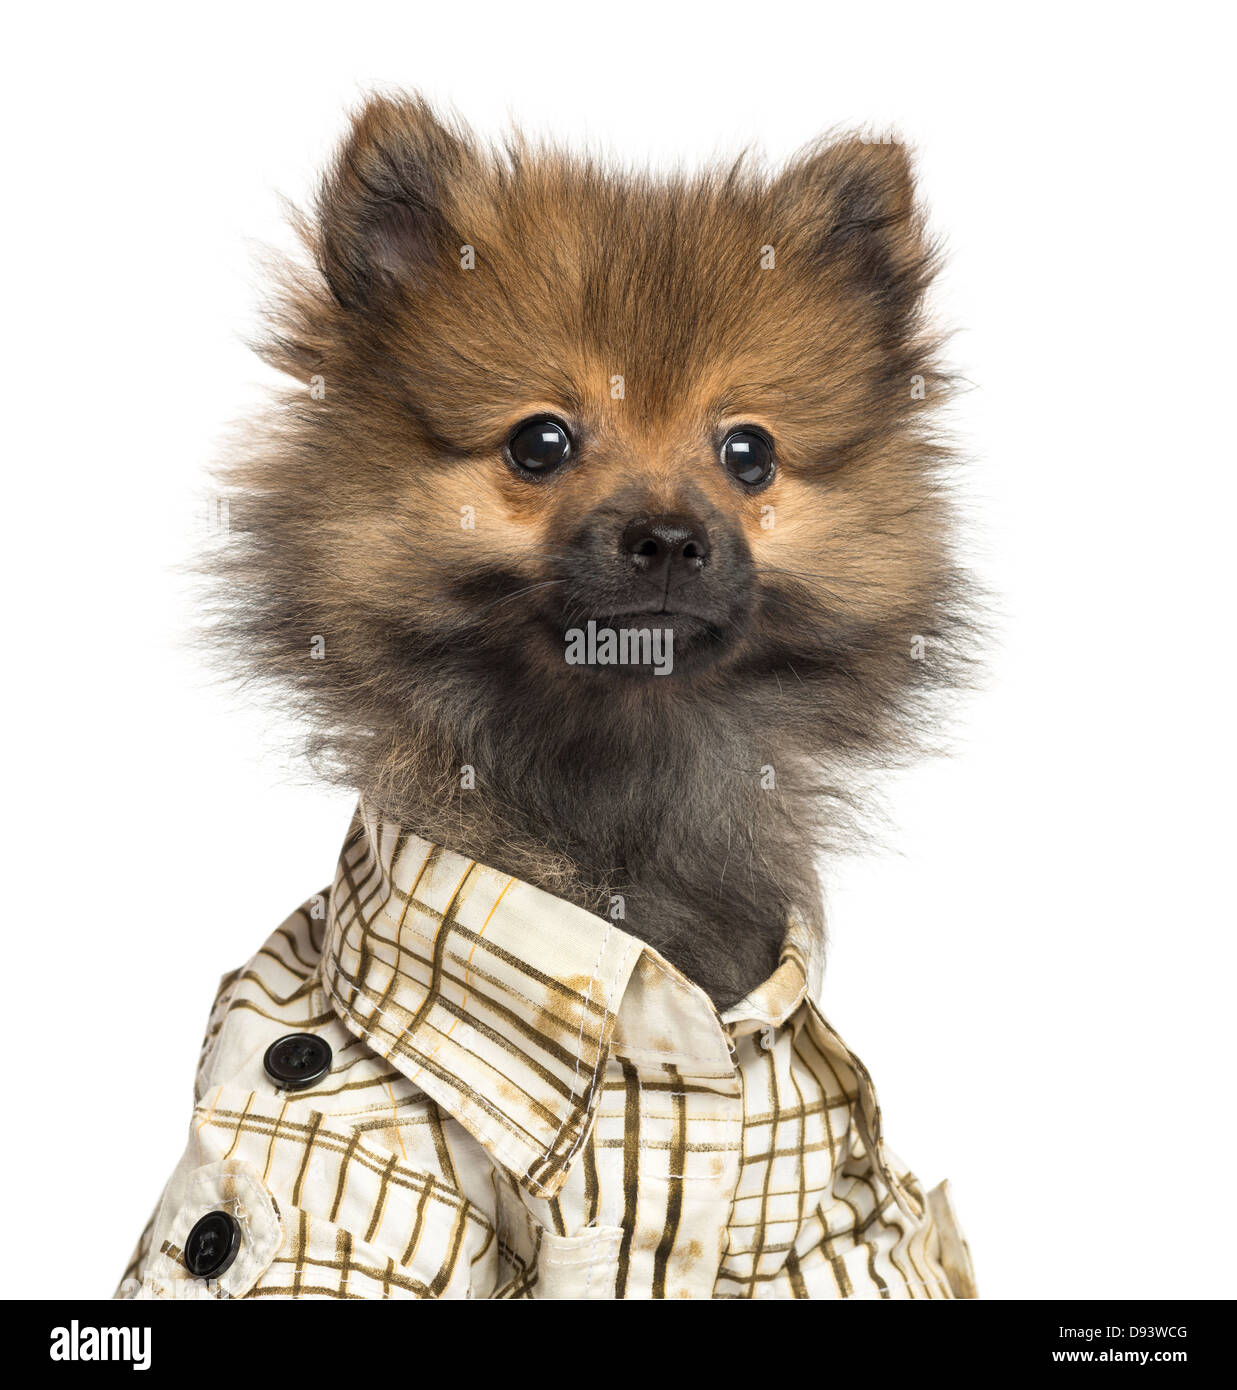 Close-up of Spitz puppy wearing a checked shirt, 4 months old, against white background Stock Photo